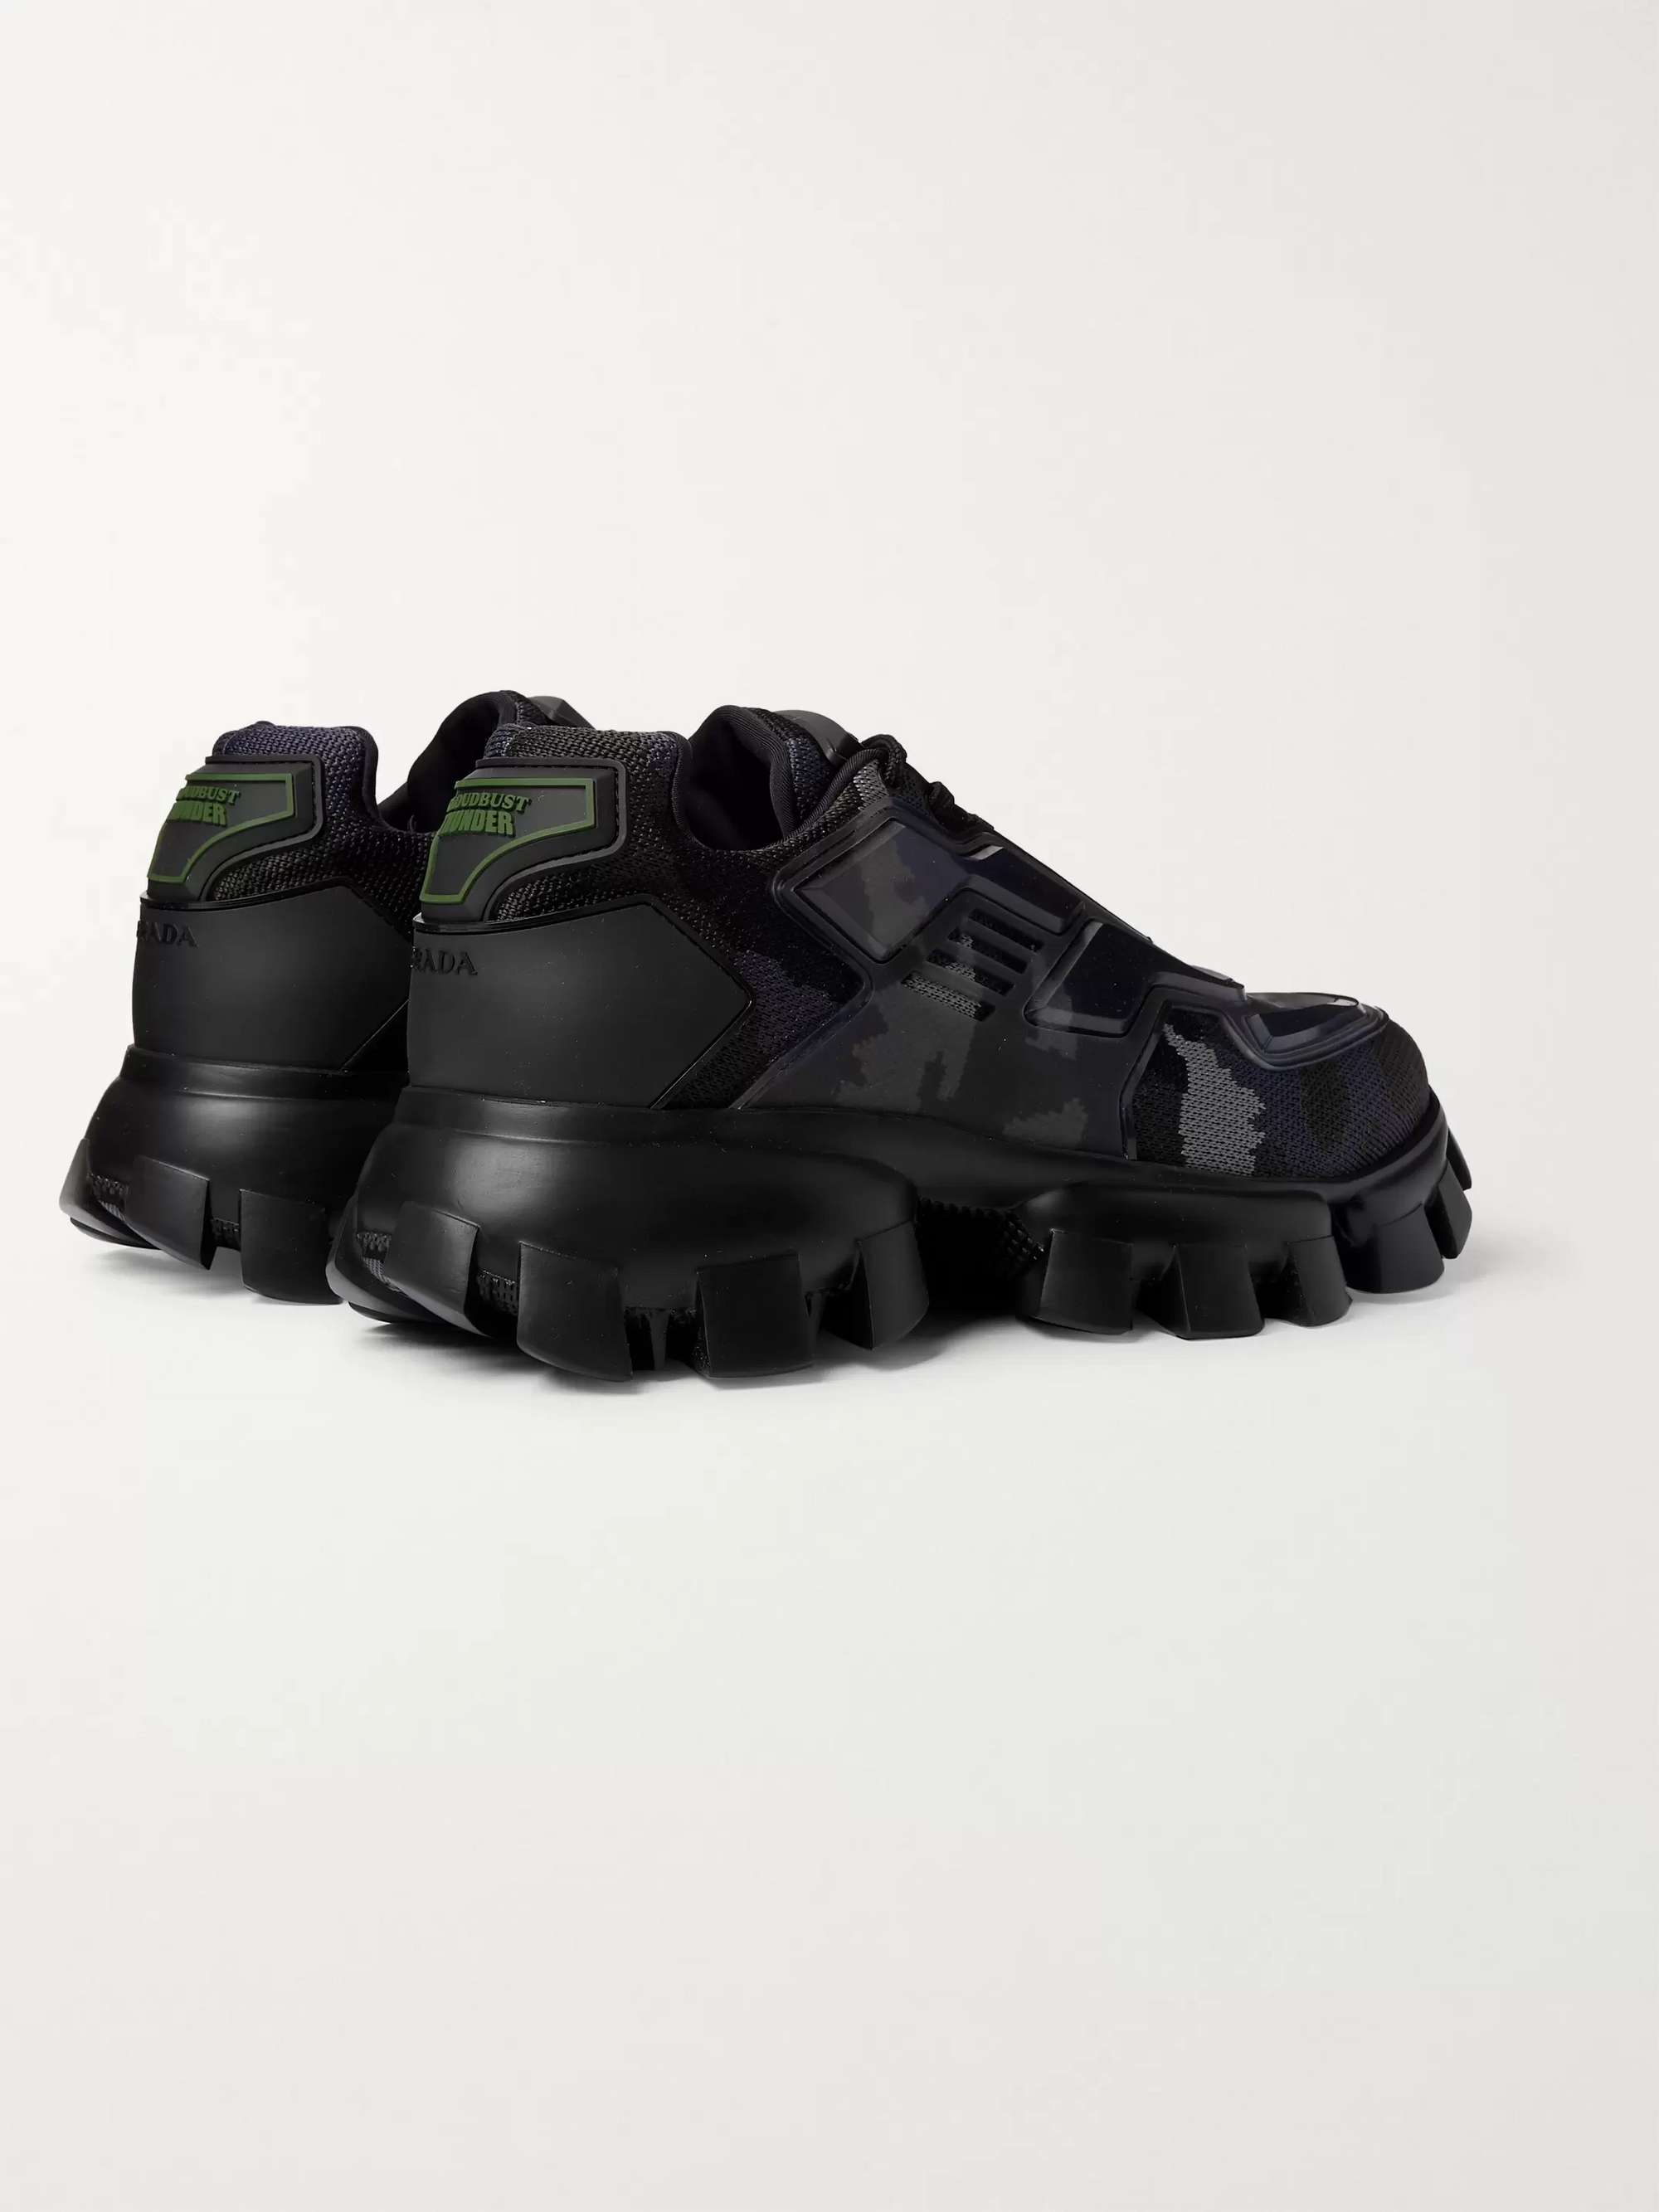 PRADA Cloudbust Thunder Rubber and Camouflage Mesh Sneakers